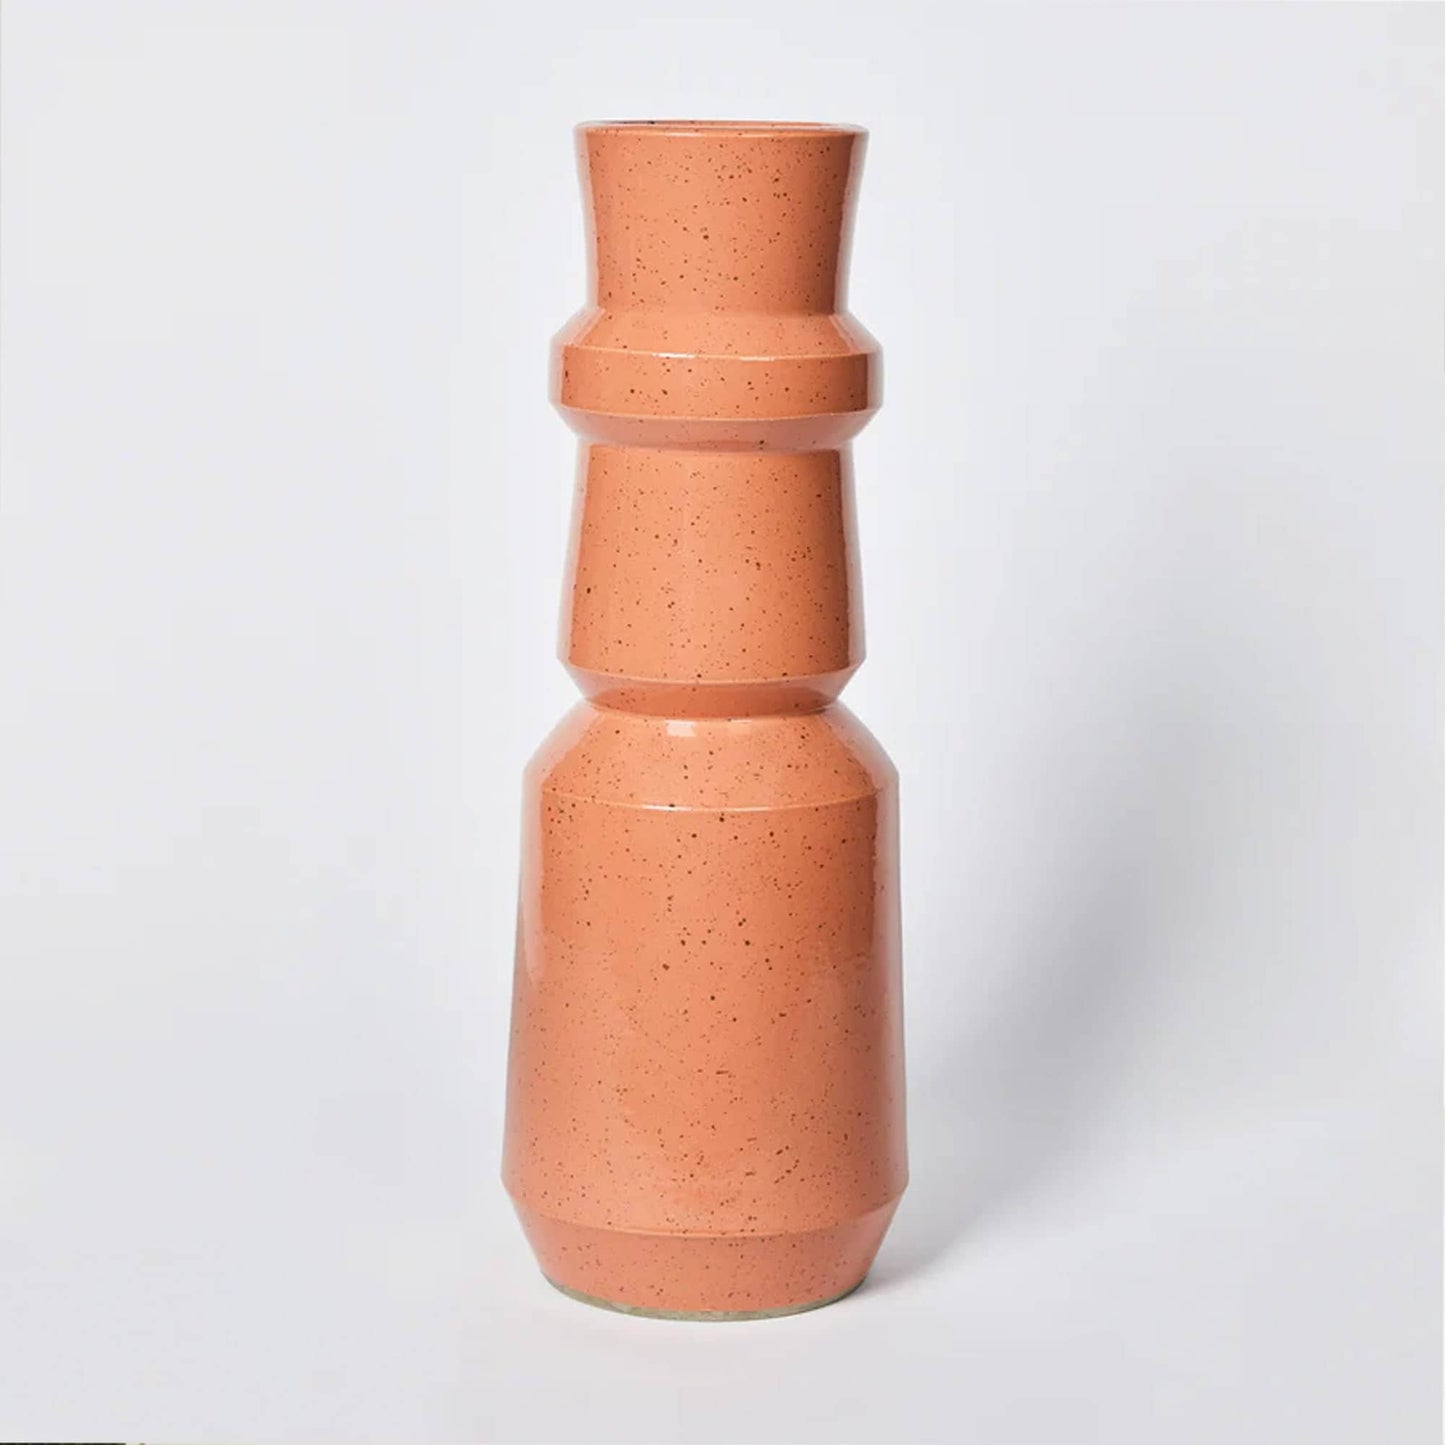 Earth Clay Vase - Large